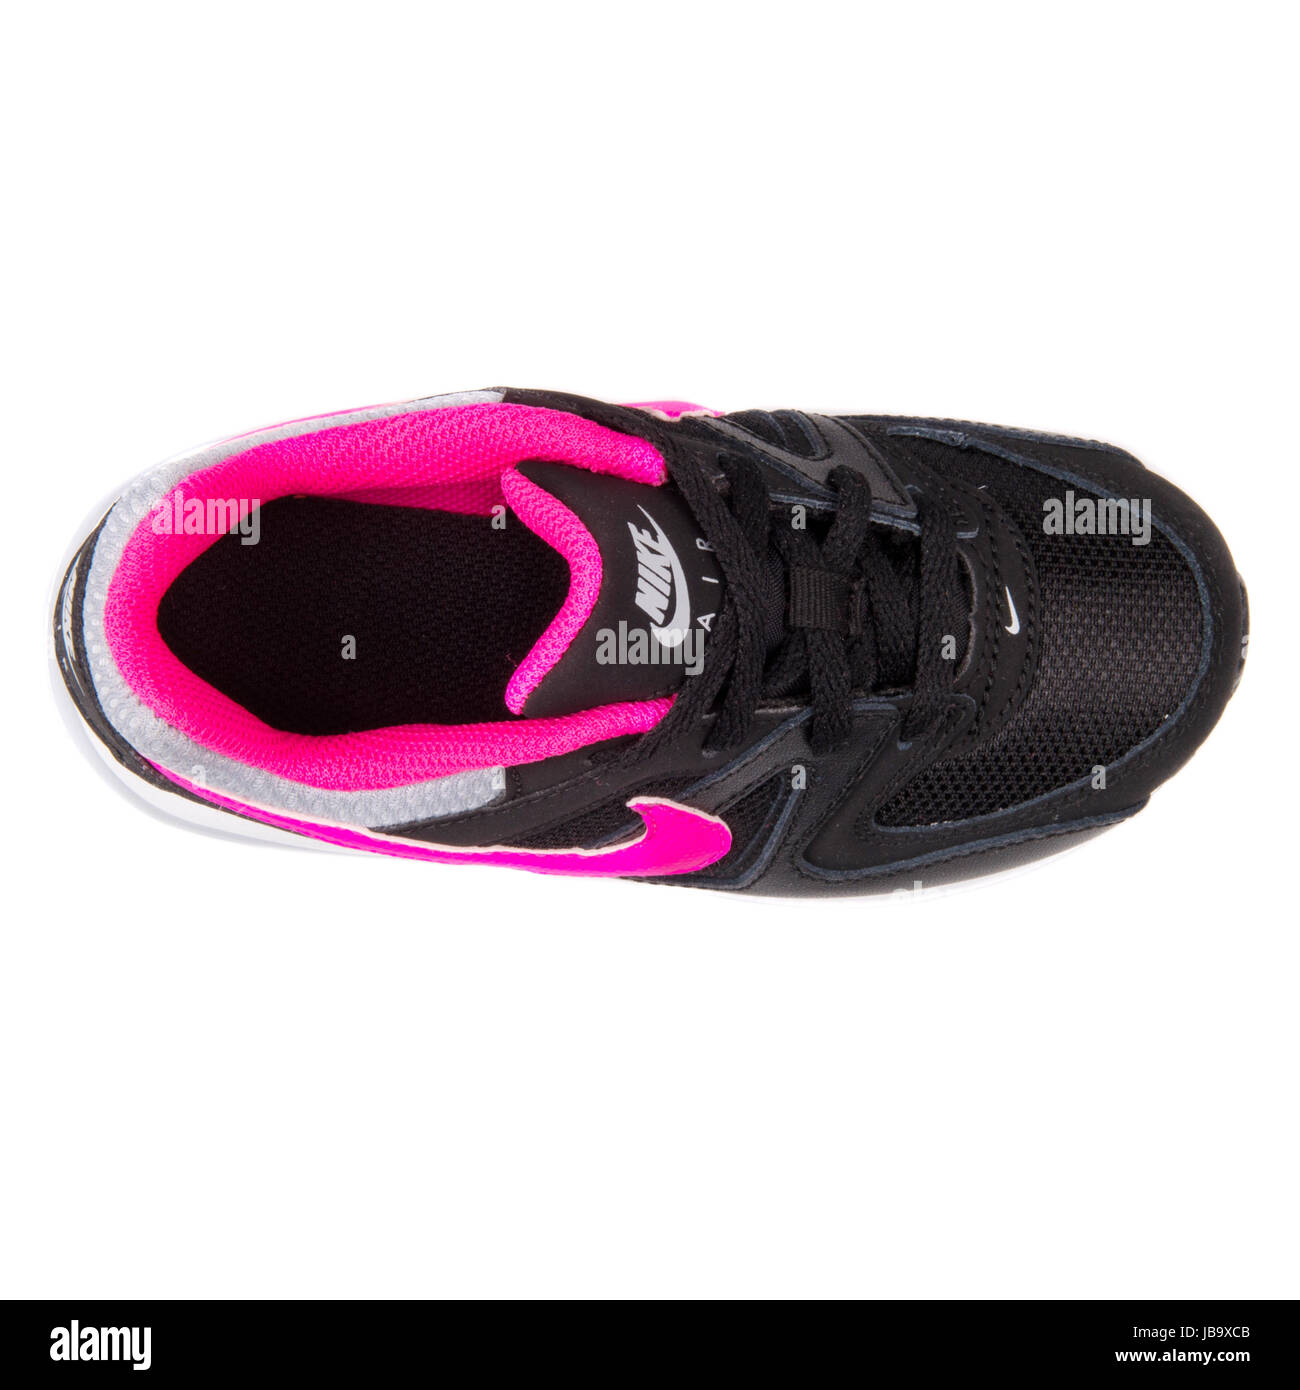 Nike Air Command (TD) Black Pink Kids Sneakers - 412232-065 Stock Photo - Alamy